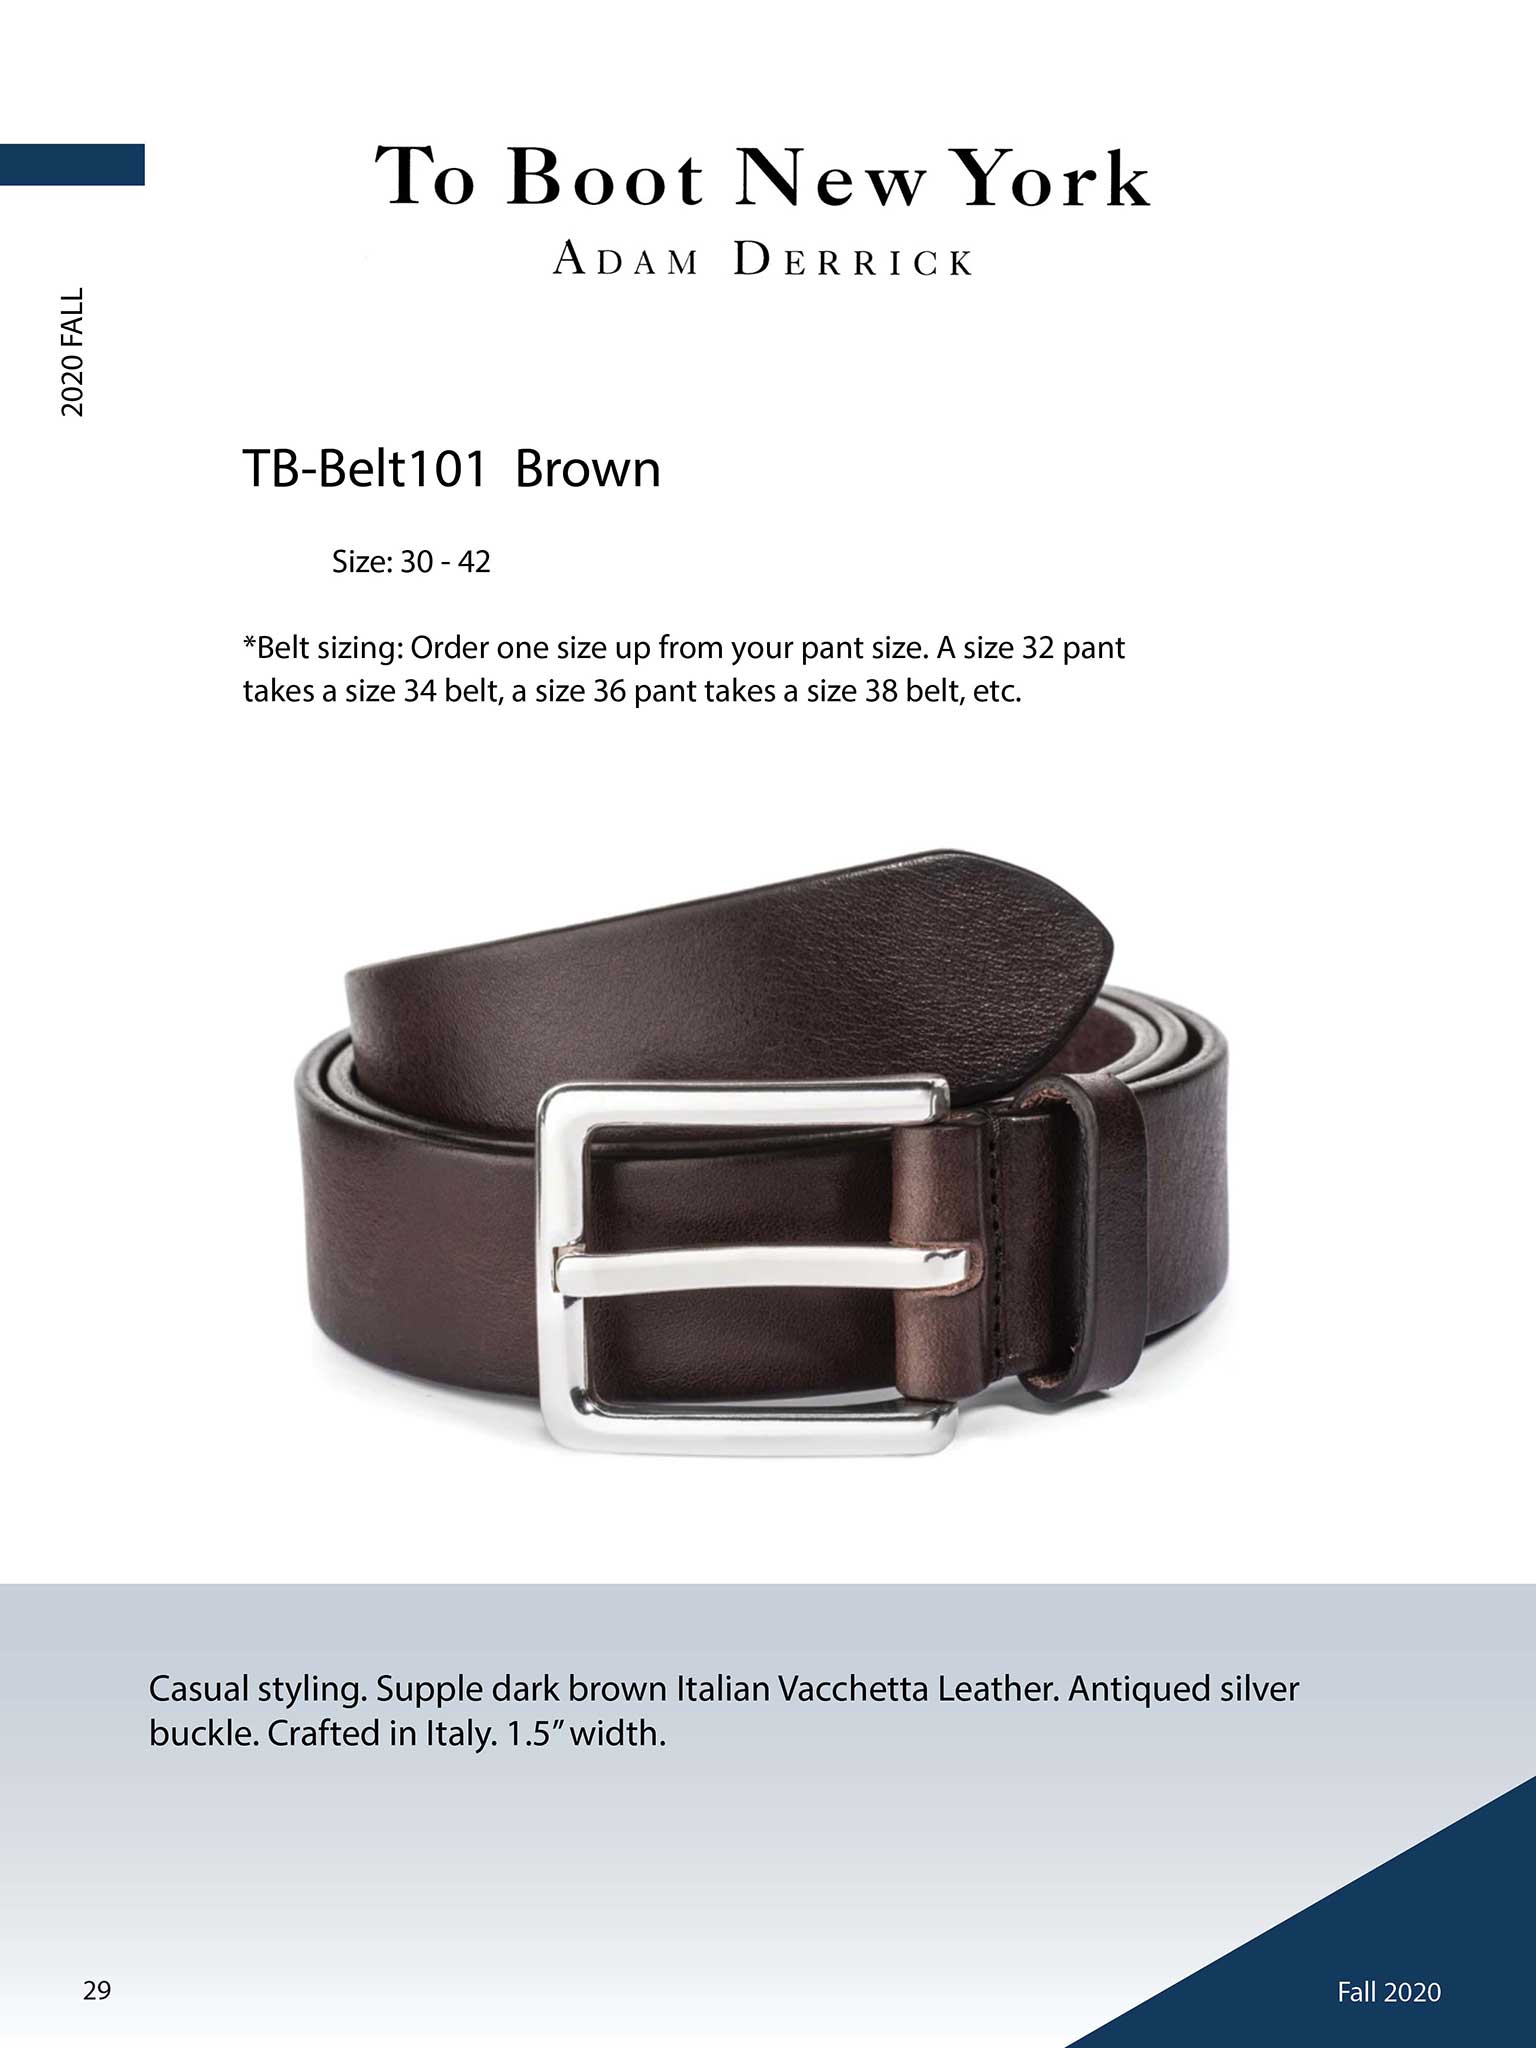 Brown Leather Belt by To Boot New York